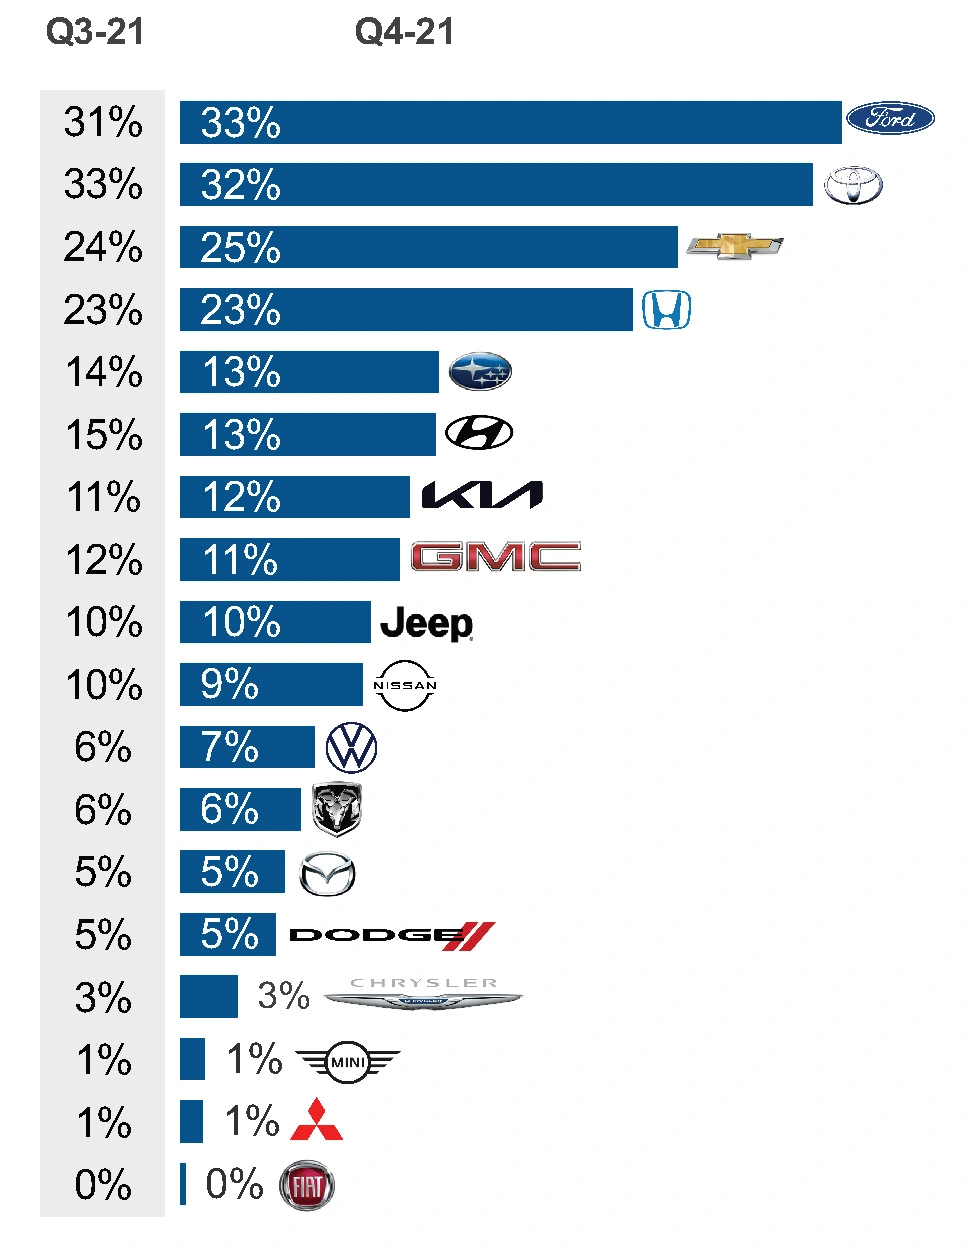 Ford Beats Toyota To Become Top Car Brand For Non-Luxury Shoppers